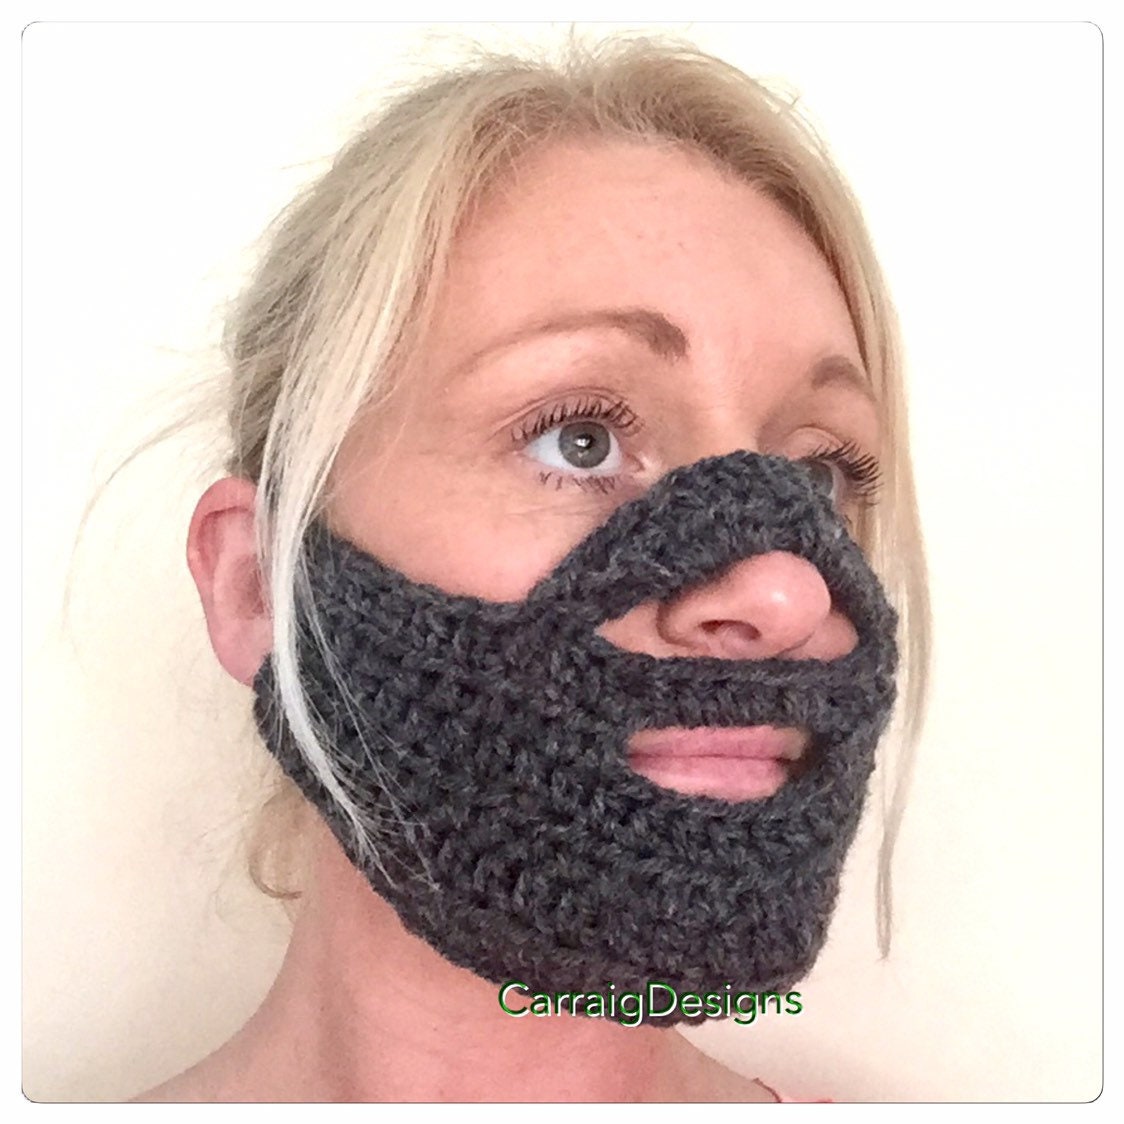 WEONEDREAM Nose Warmer Cotton Plaid Nose Cover Winter Nose Warmers for Men  Women Dust Mask Anti Pollen Air Conditioning Cold Nose Dry Sleep Wool Nose